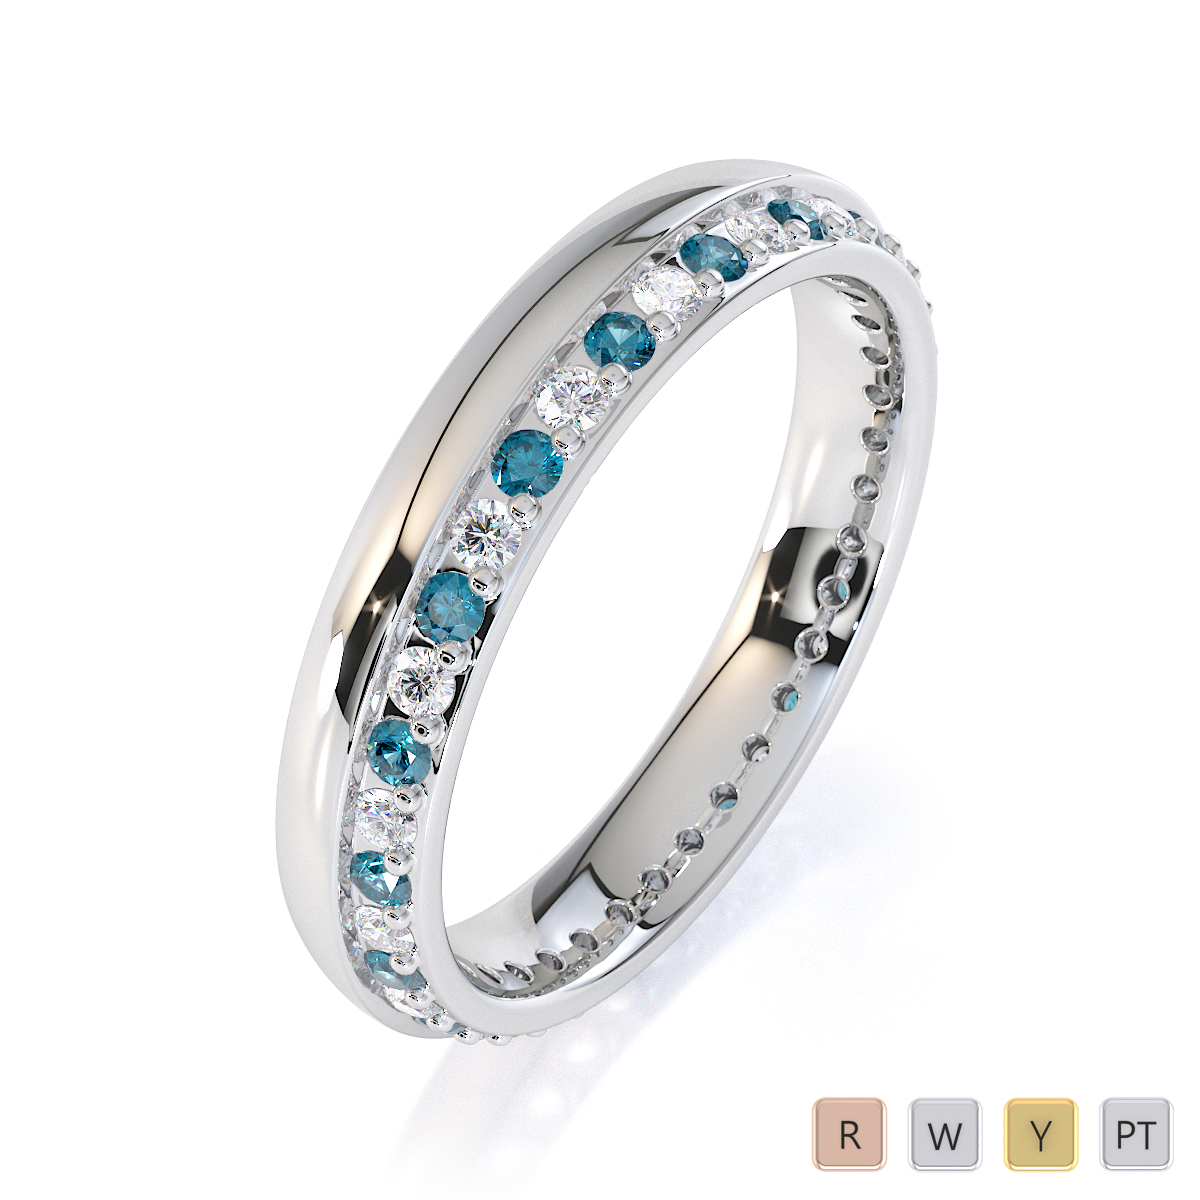 Channel and Prong Set Aquamarine Full Eternity Ring With Diamond in Gold / Platinum ATZR-0440